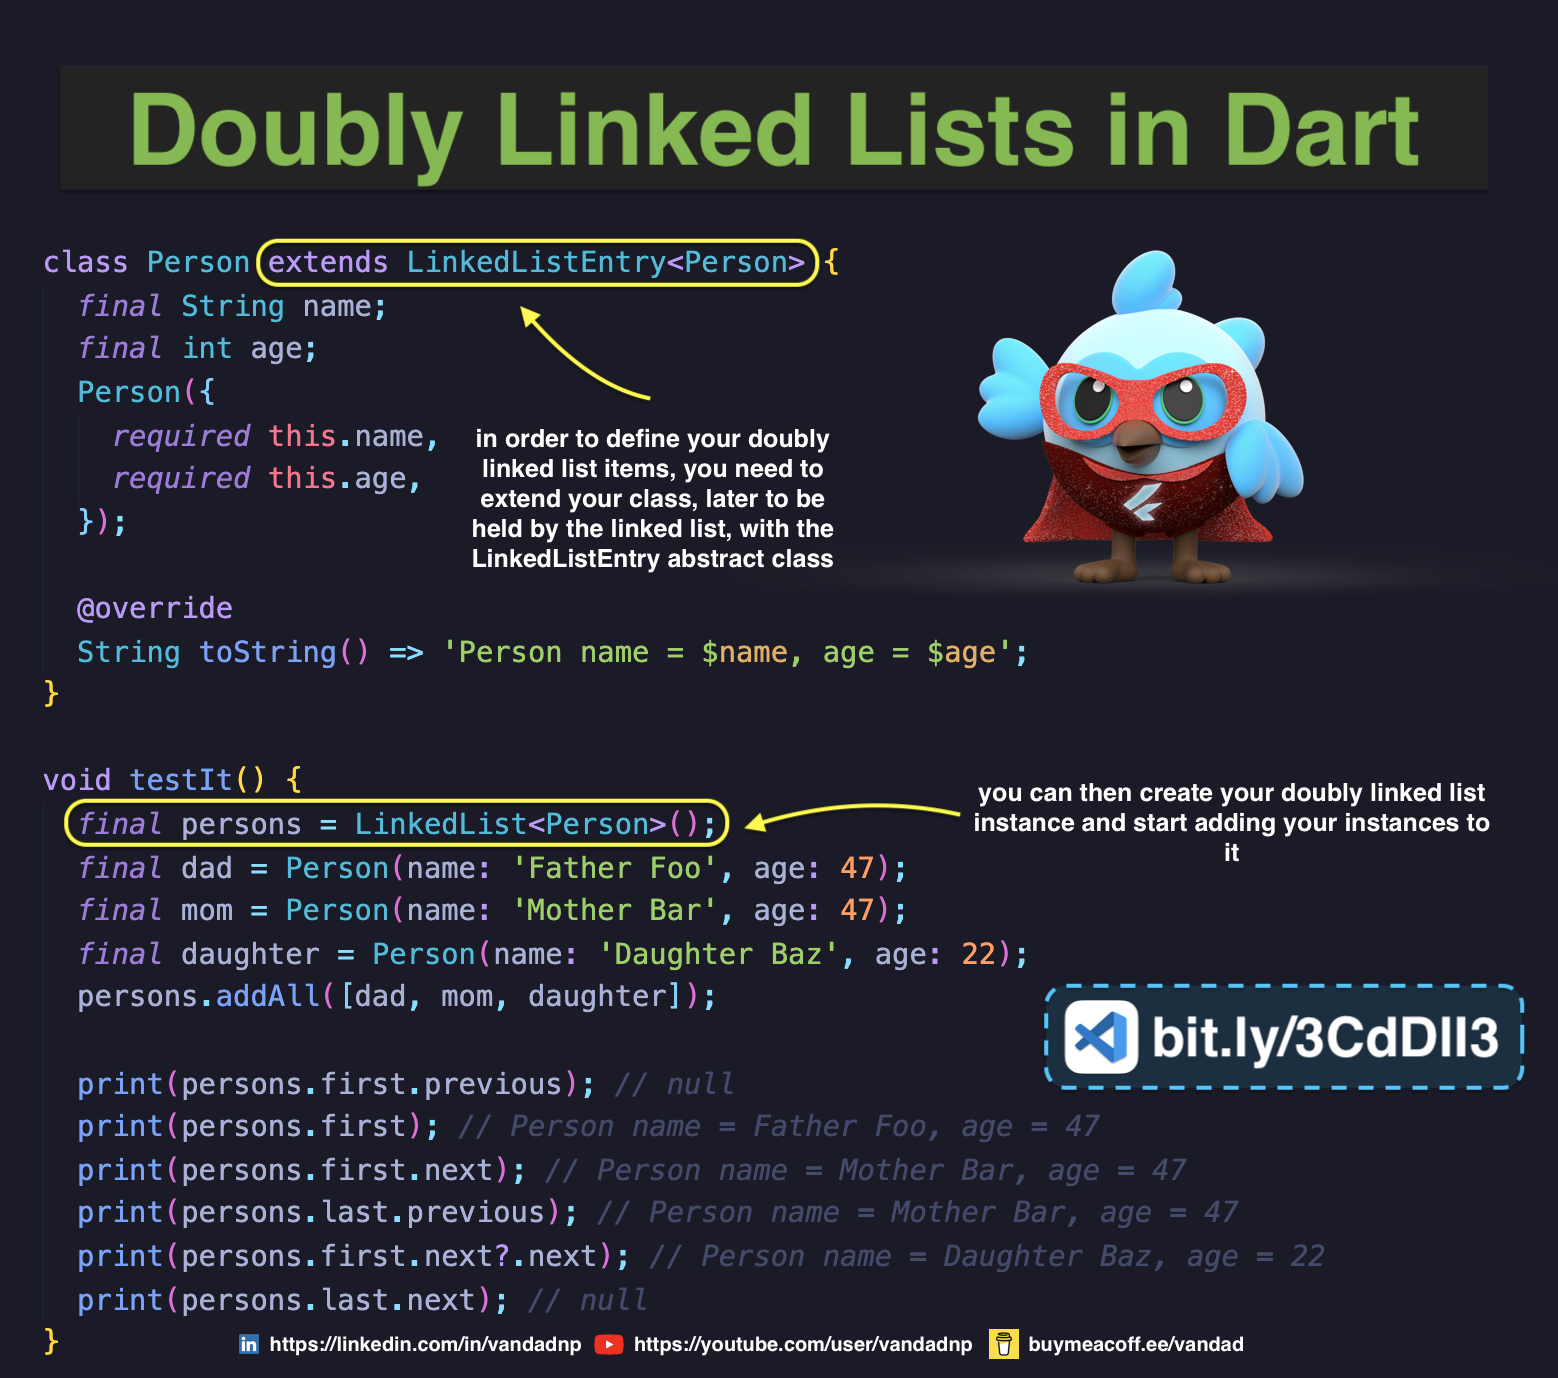 doubly-linked-lists-in-dart.jpg